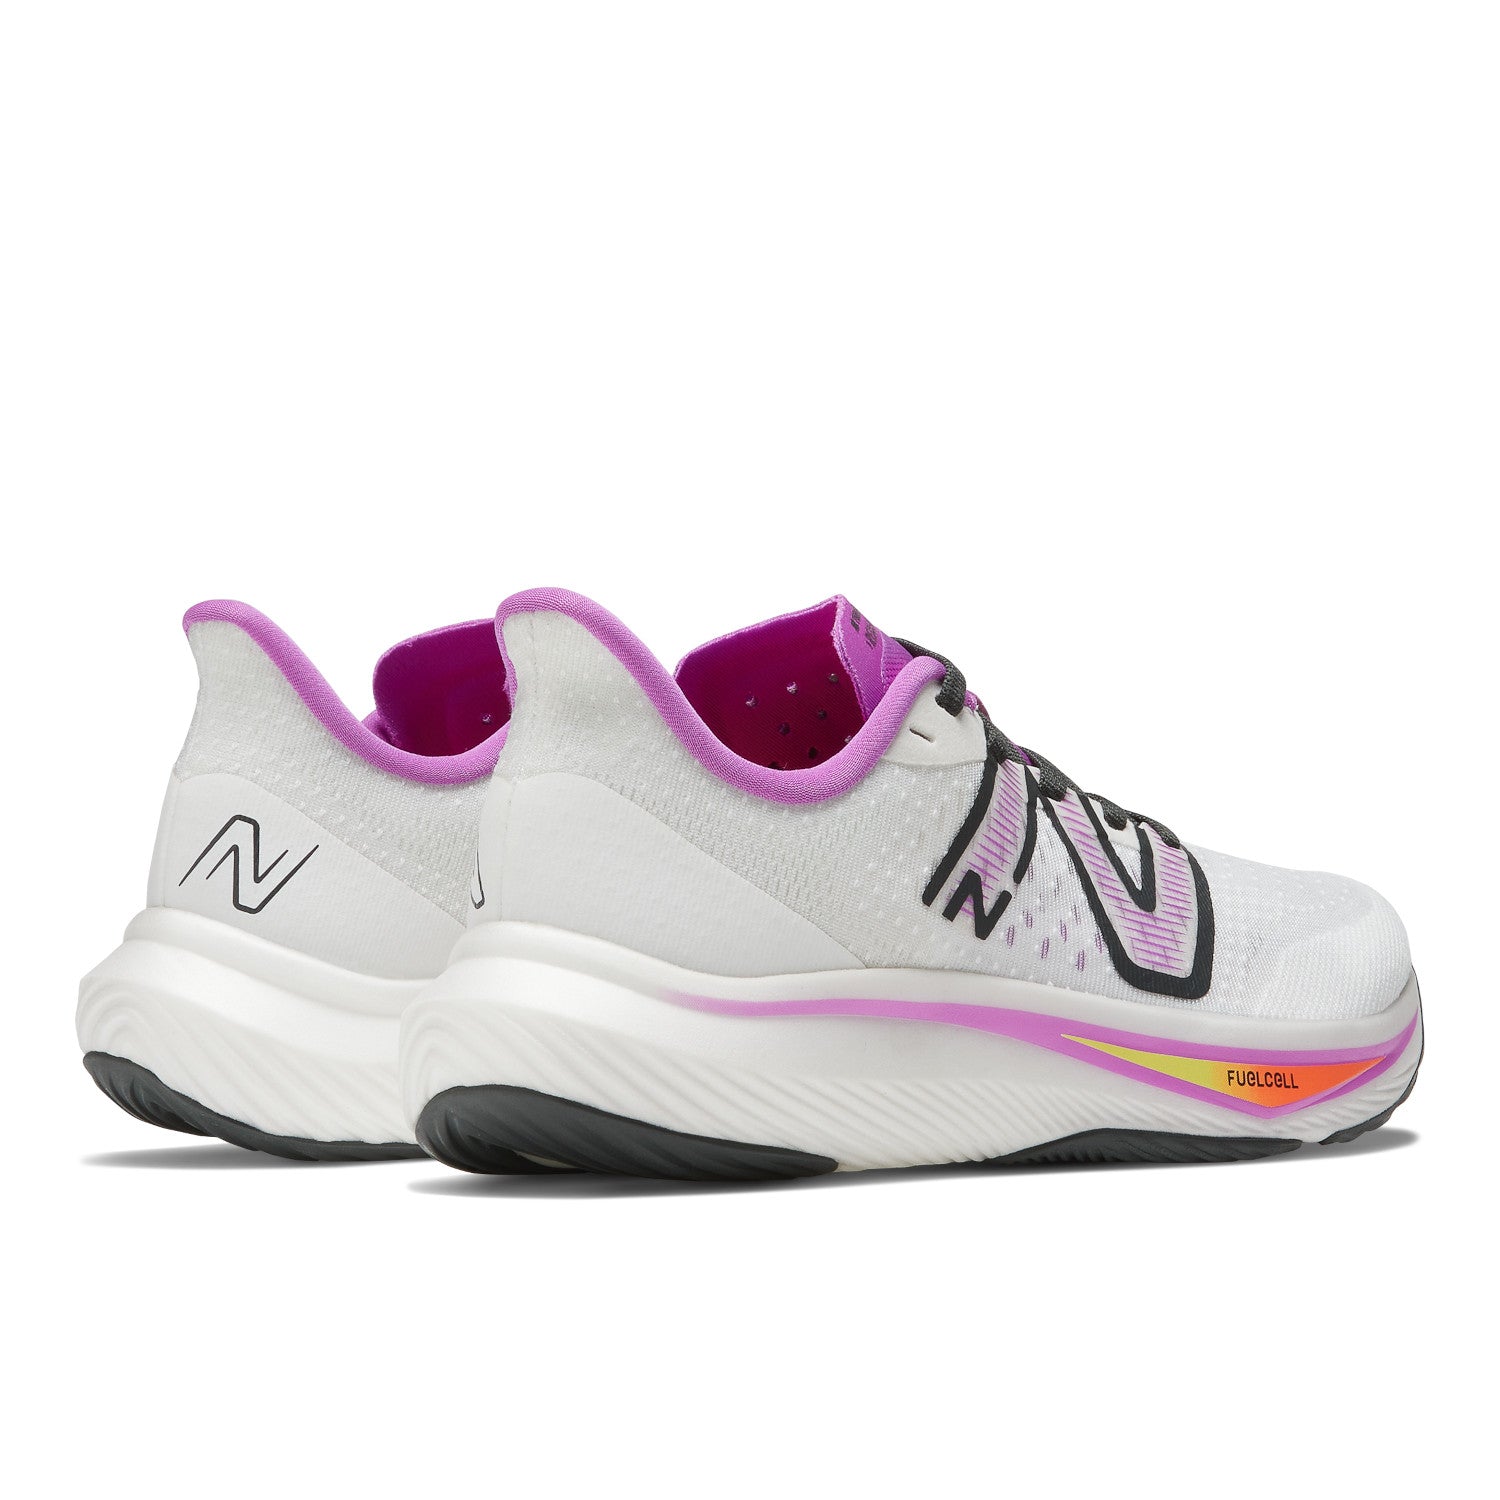 New Balance FuelCell Rebel v3 WFCXCW3 Women's12